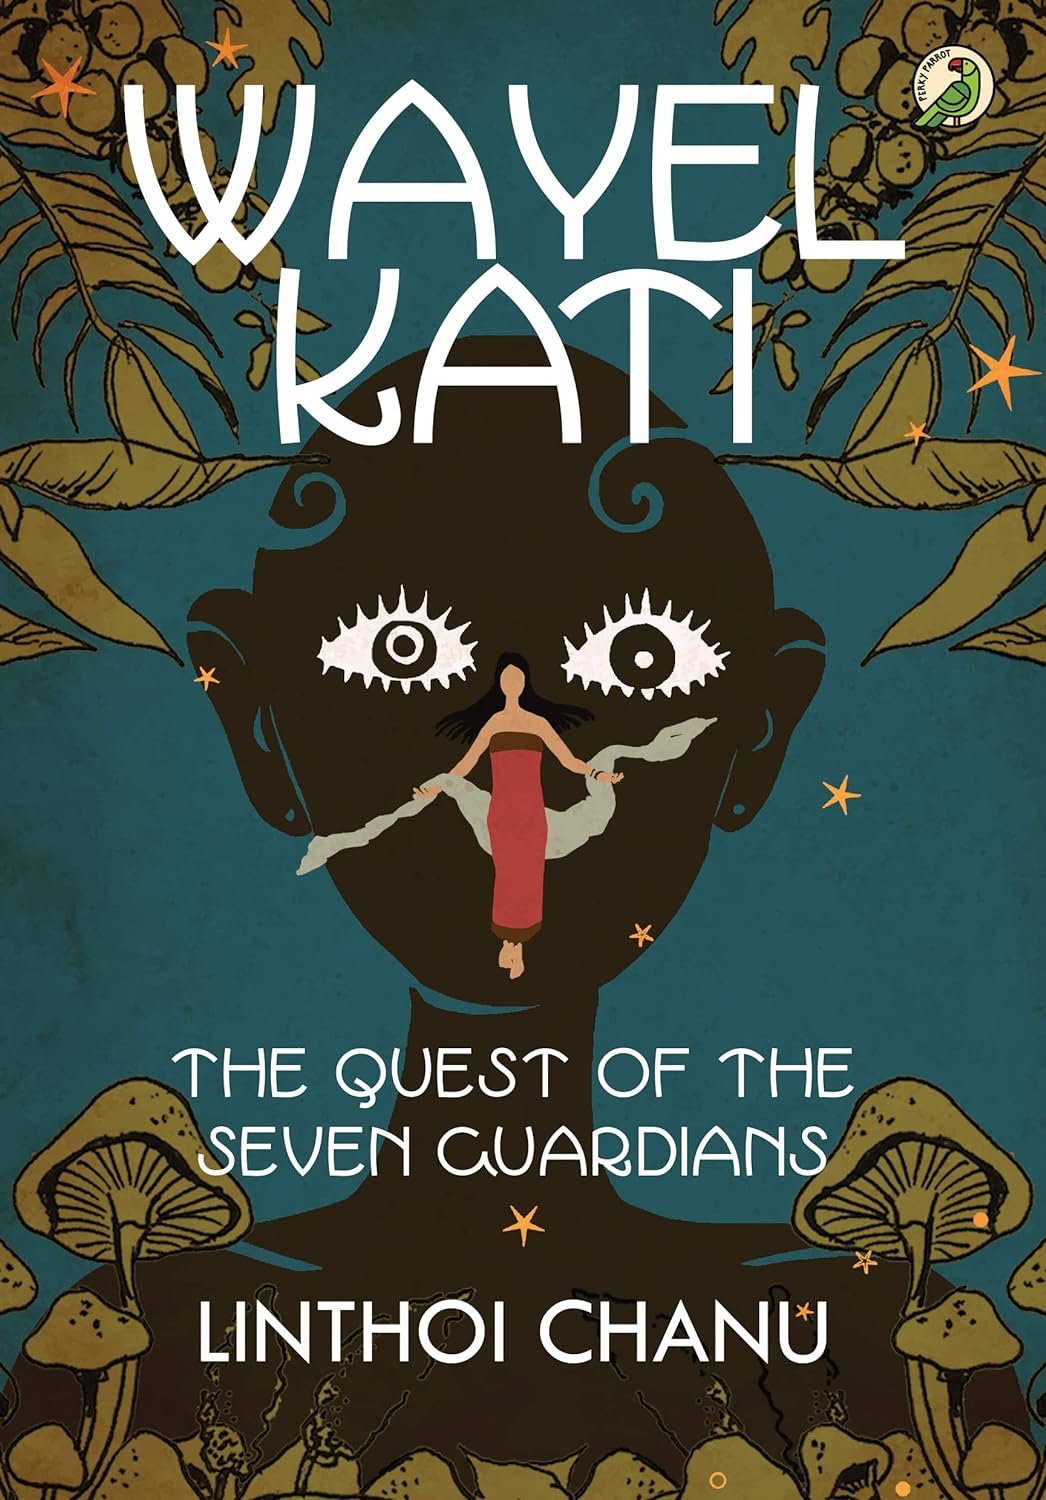 You are currently viewing Wayel Kati – The Quest of the Seven Guardians by Linthoi Chanun